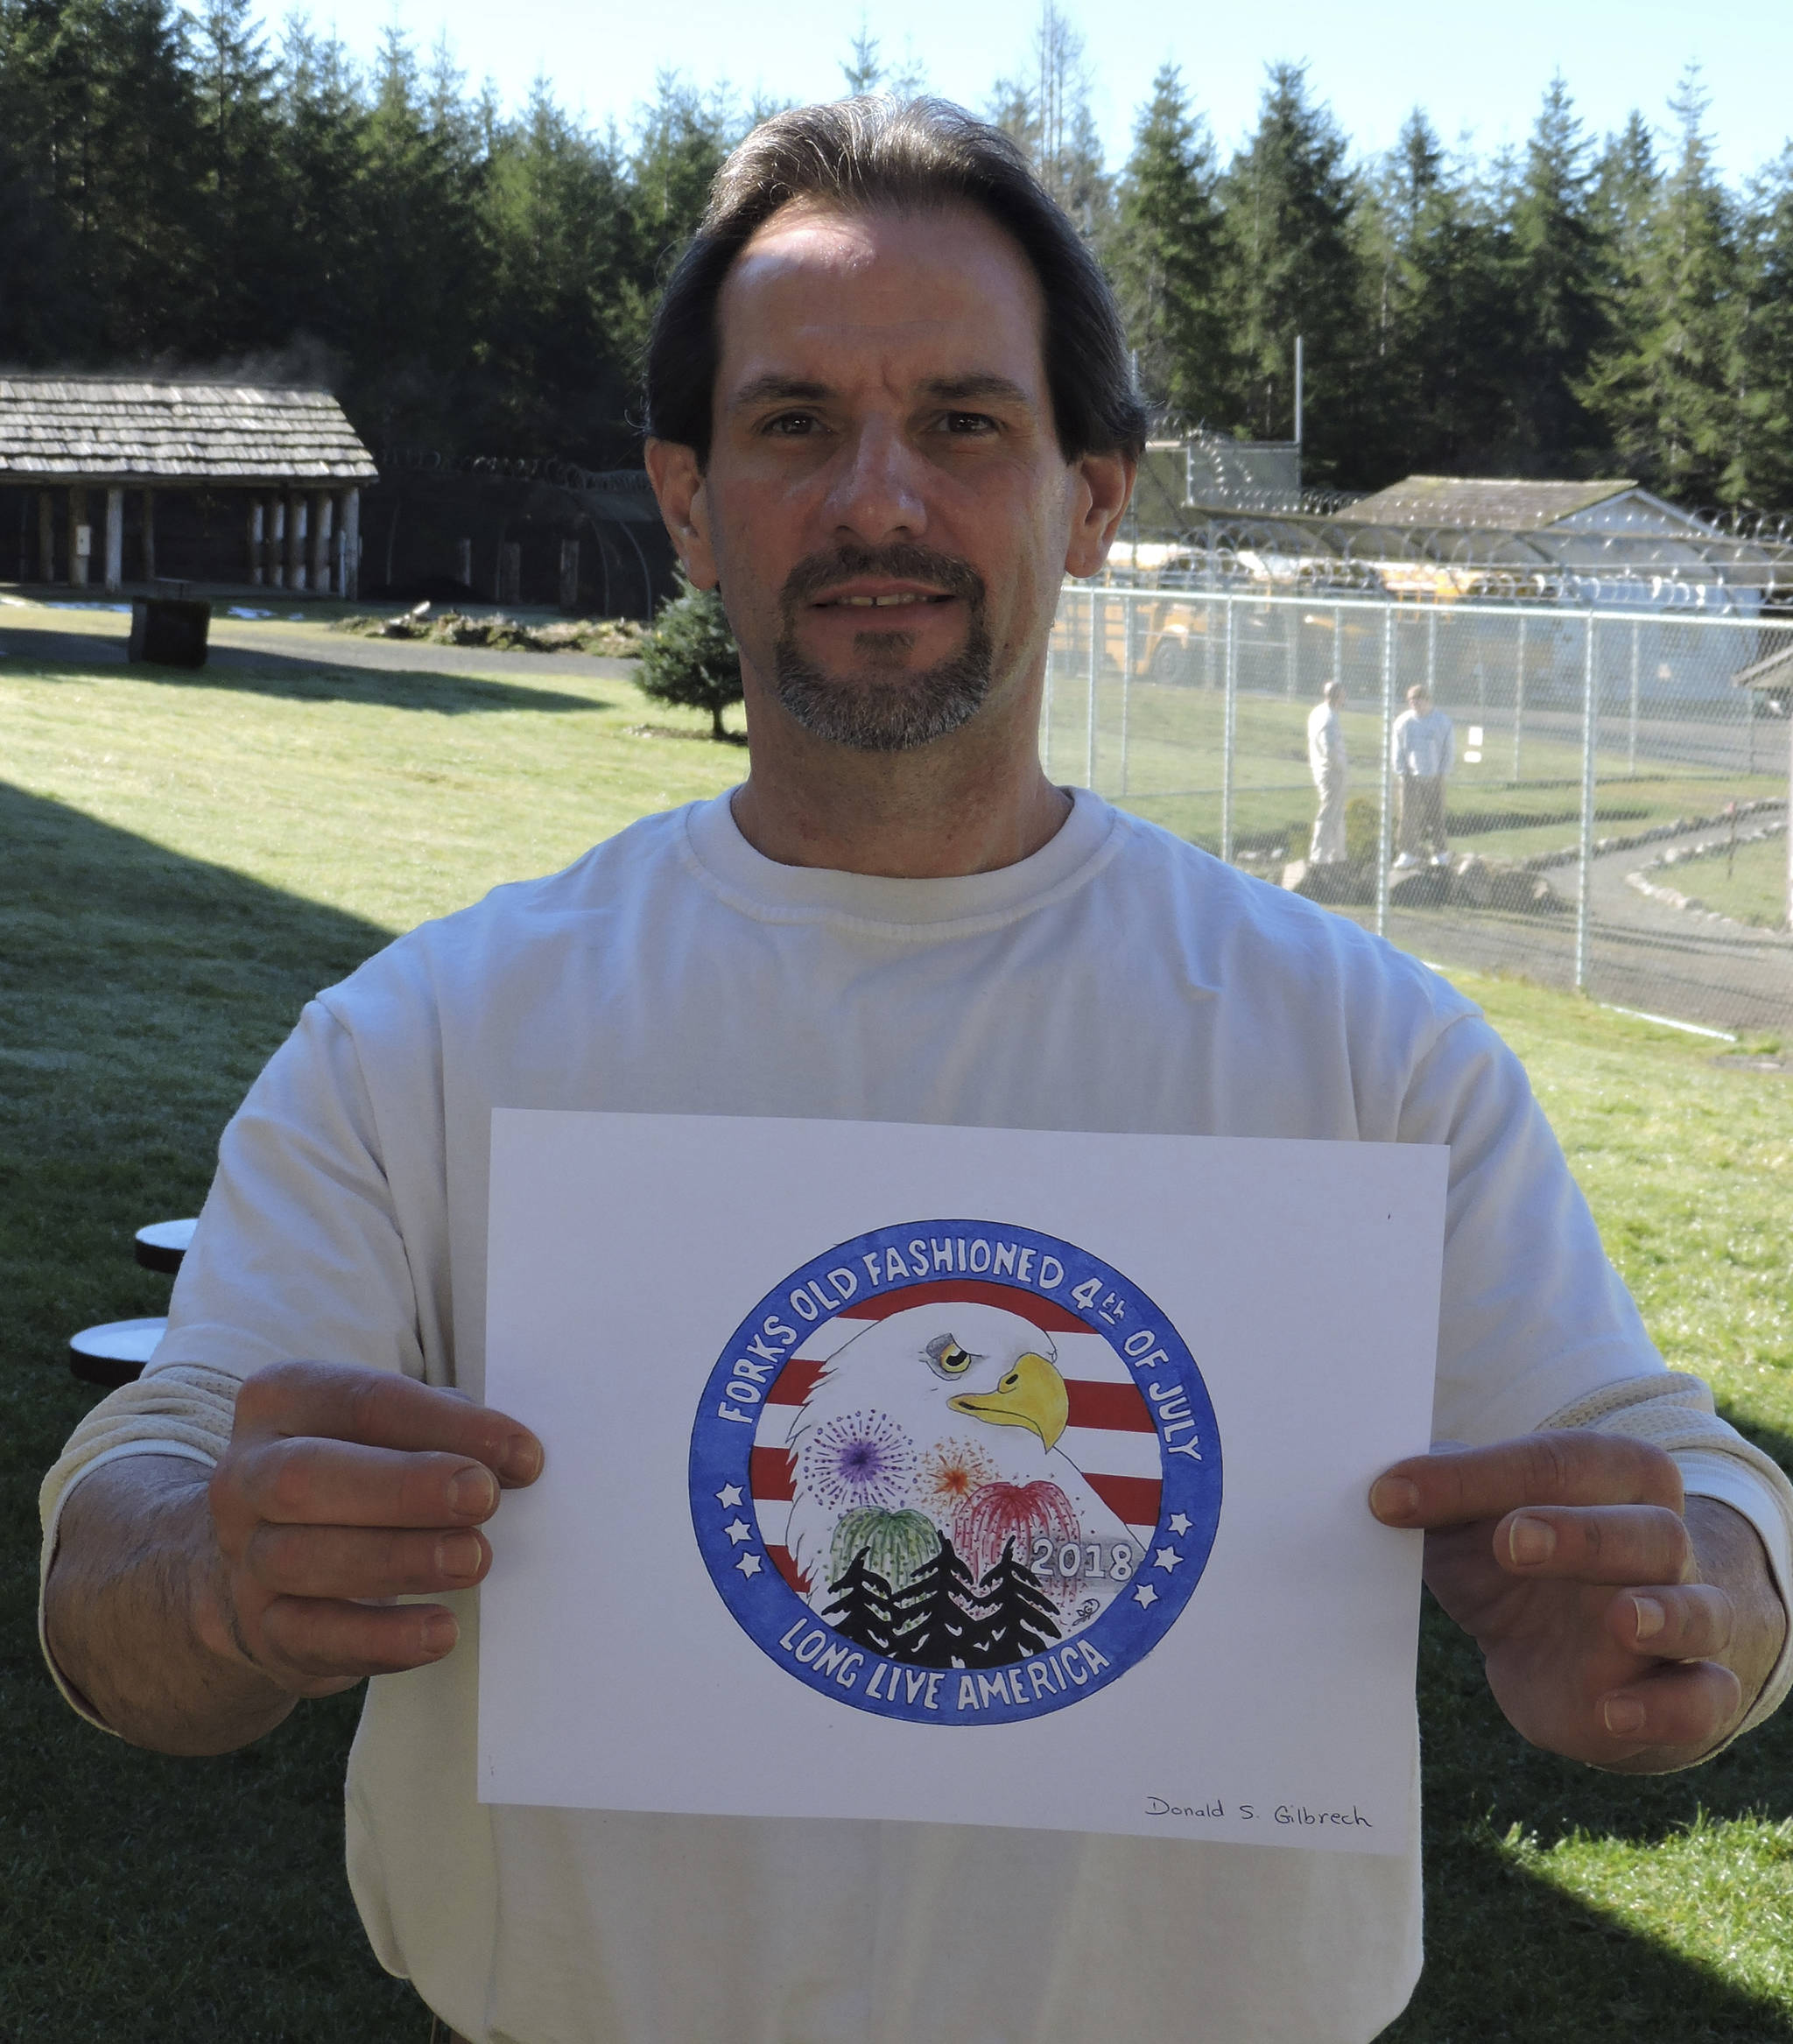 Donald Gilbrech is seen here at Olympic Corrections Center with his winnng design.